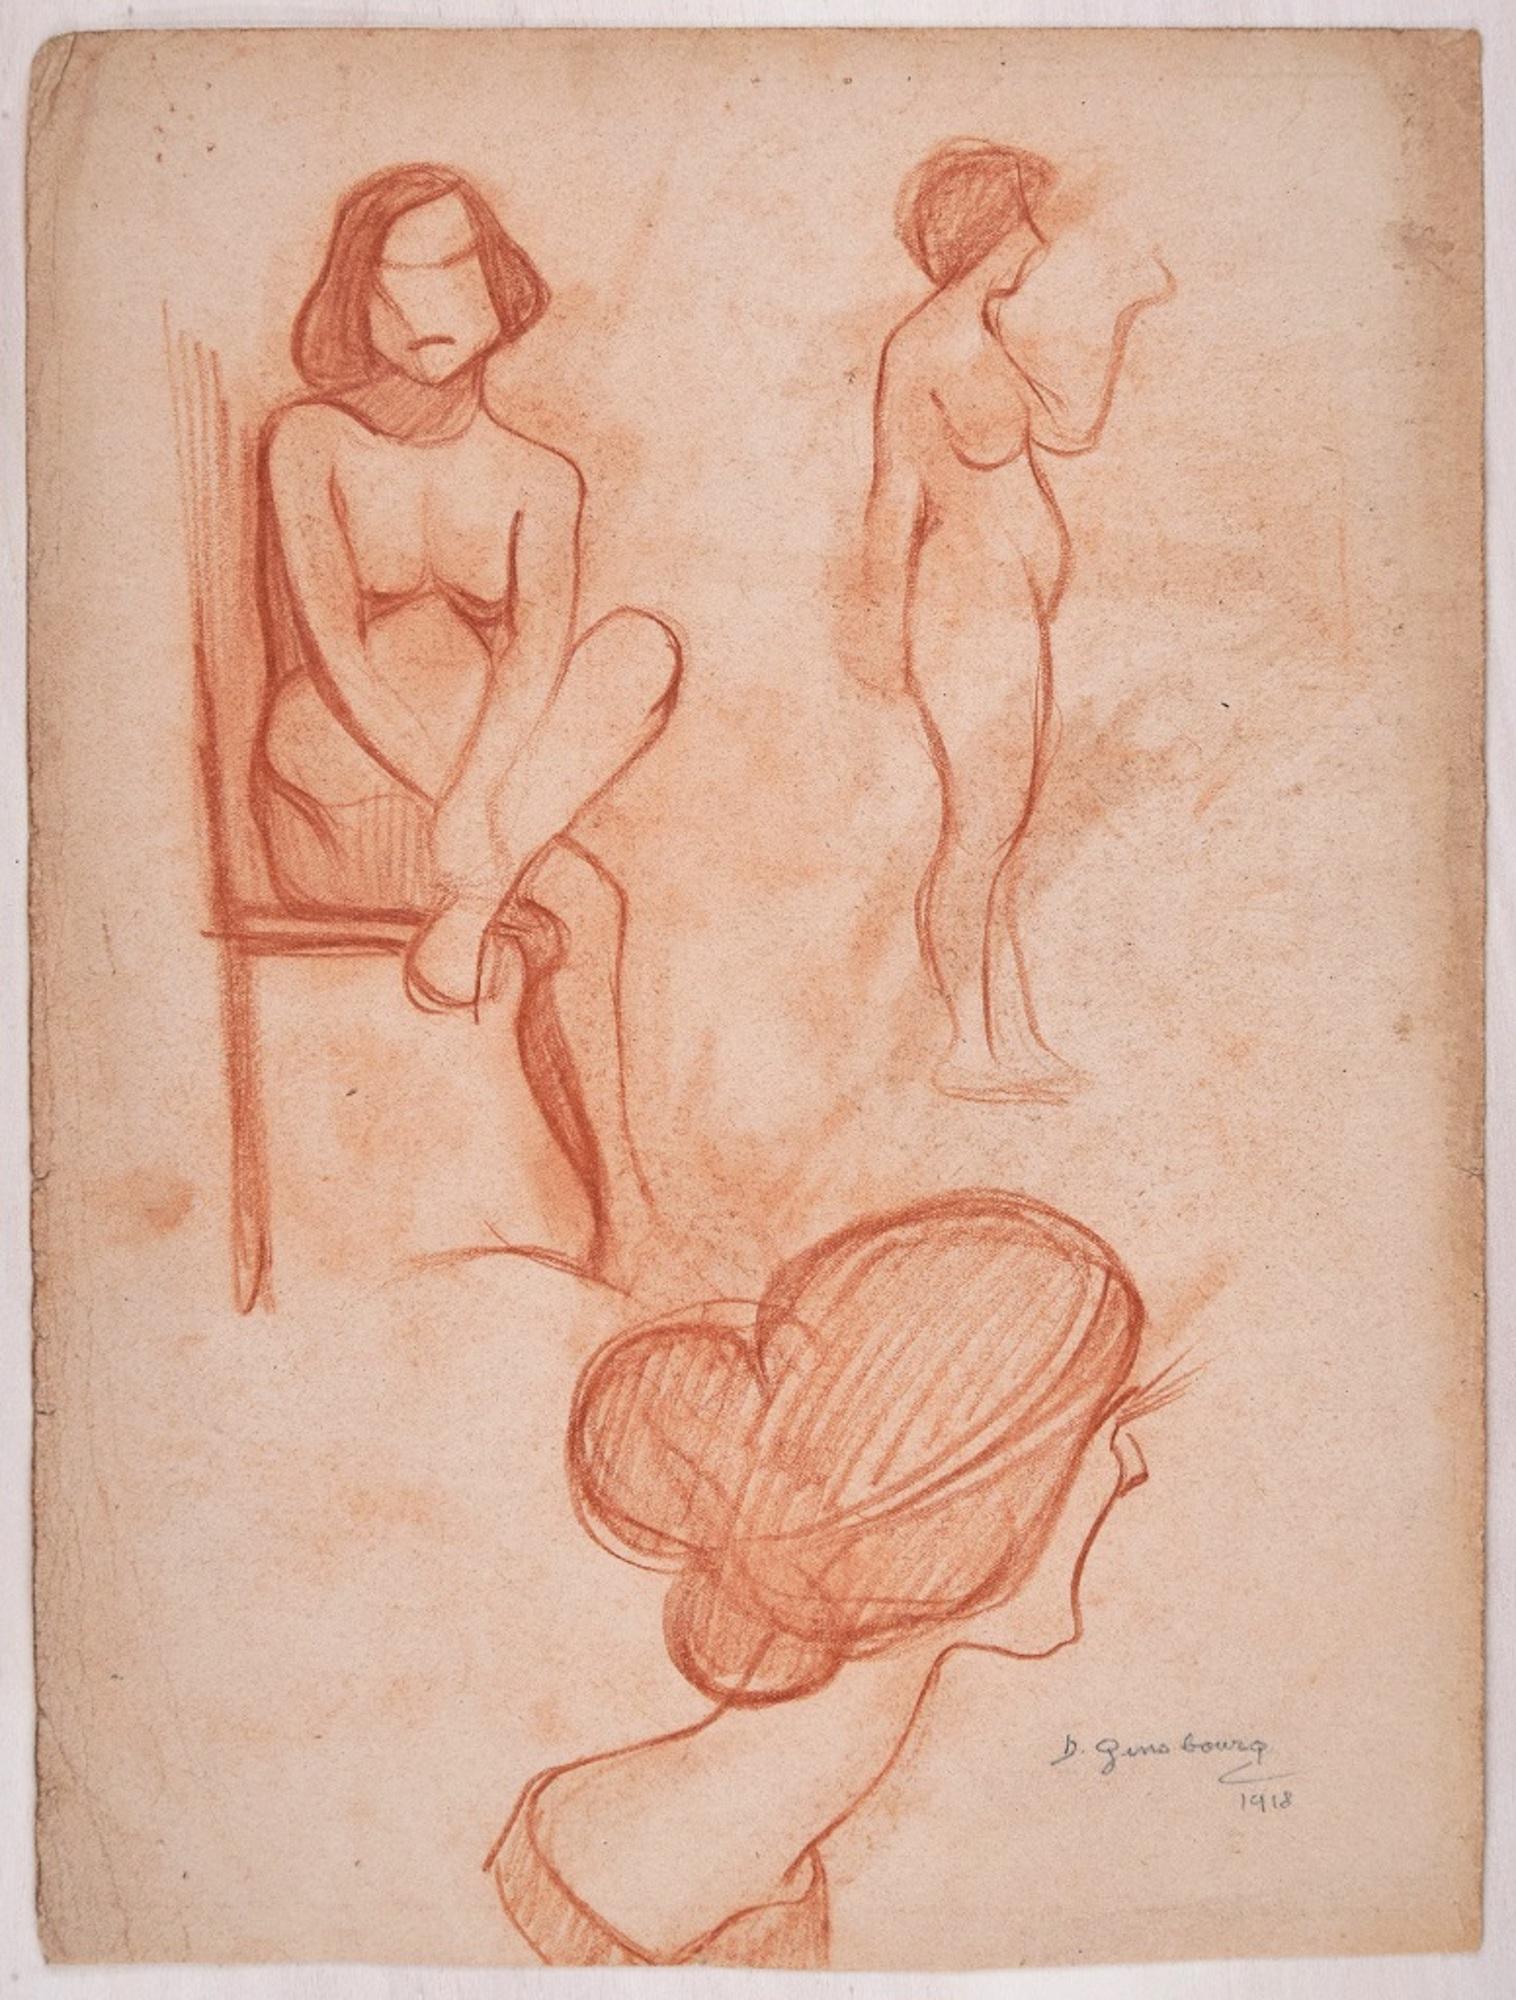 Studies for the Female Figure - Pencil Drawing by D. Ginsbourg - 1918 - Art by Daniel Ginsbourg